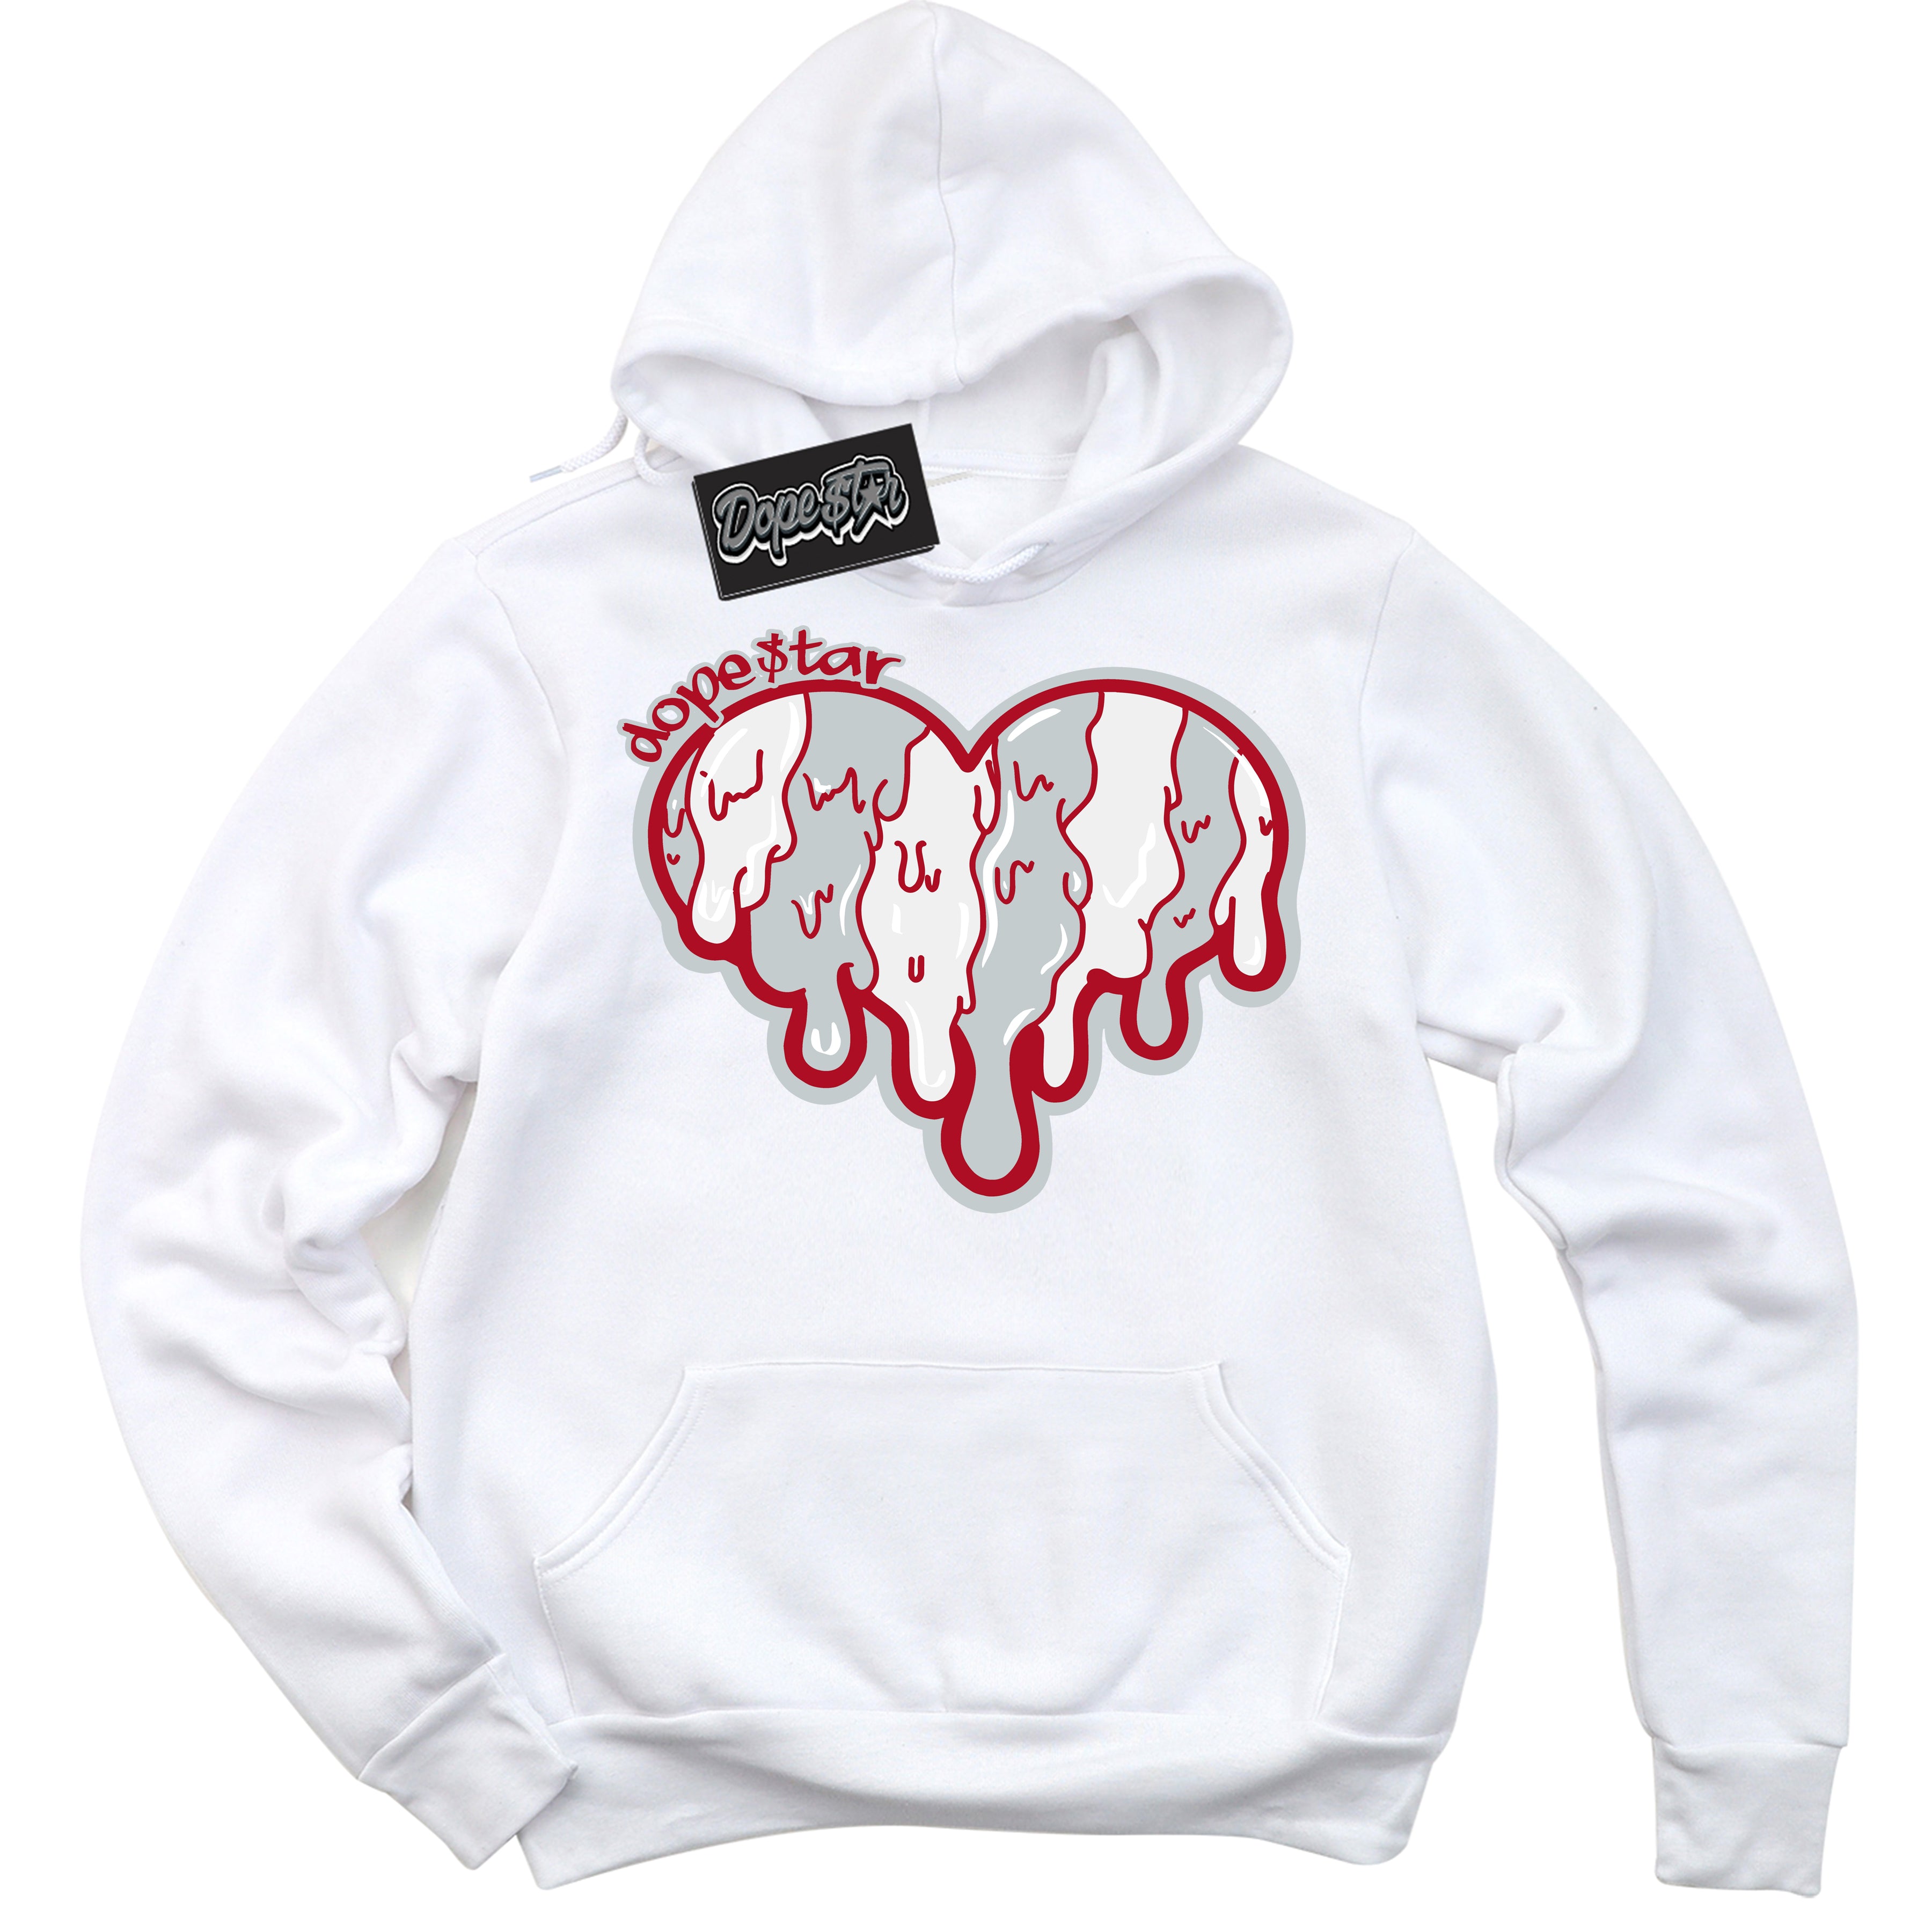 Cool Black Hoodie with “ Melting Heart ”  design that Perfectly Matches  Reverse Ultraman Sneakers.